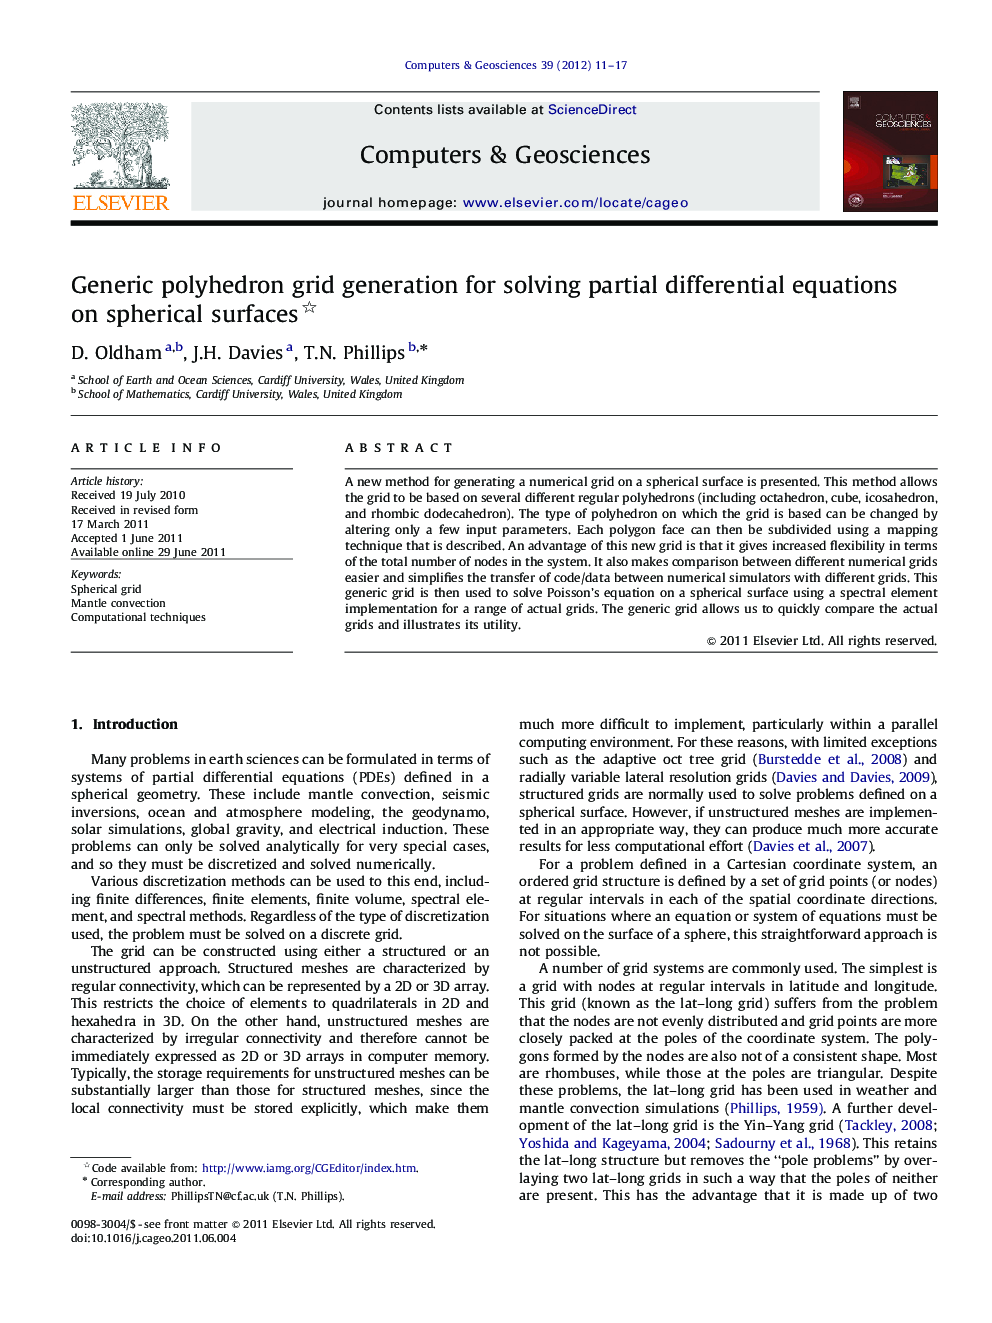 Generic polyhedron grid generation for solving partial differential equations on spherical surfaces 